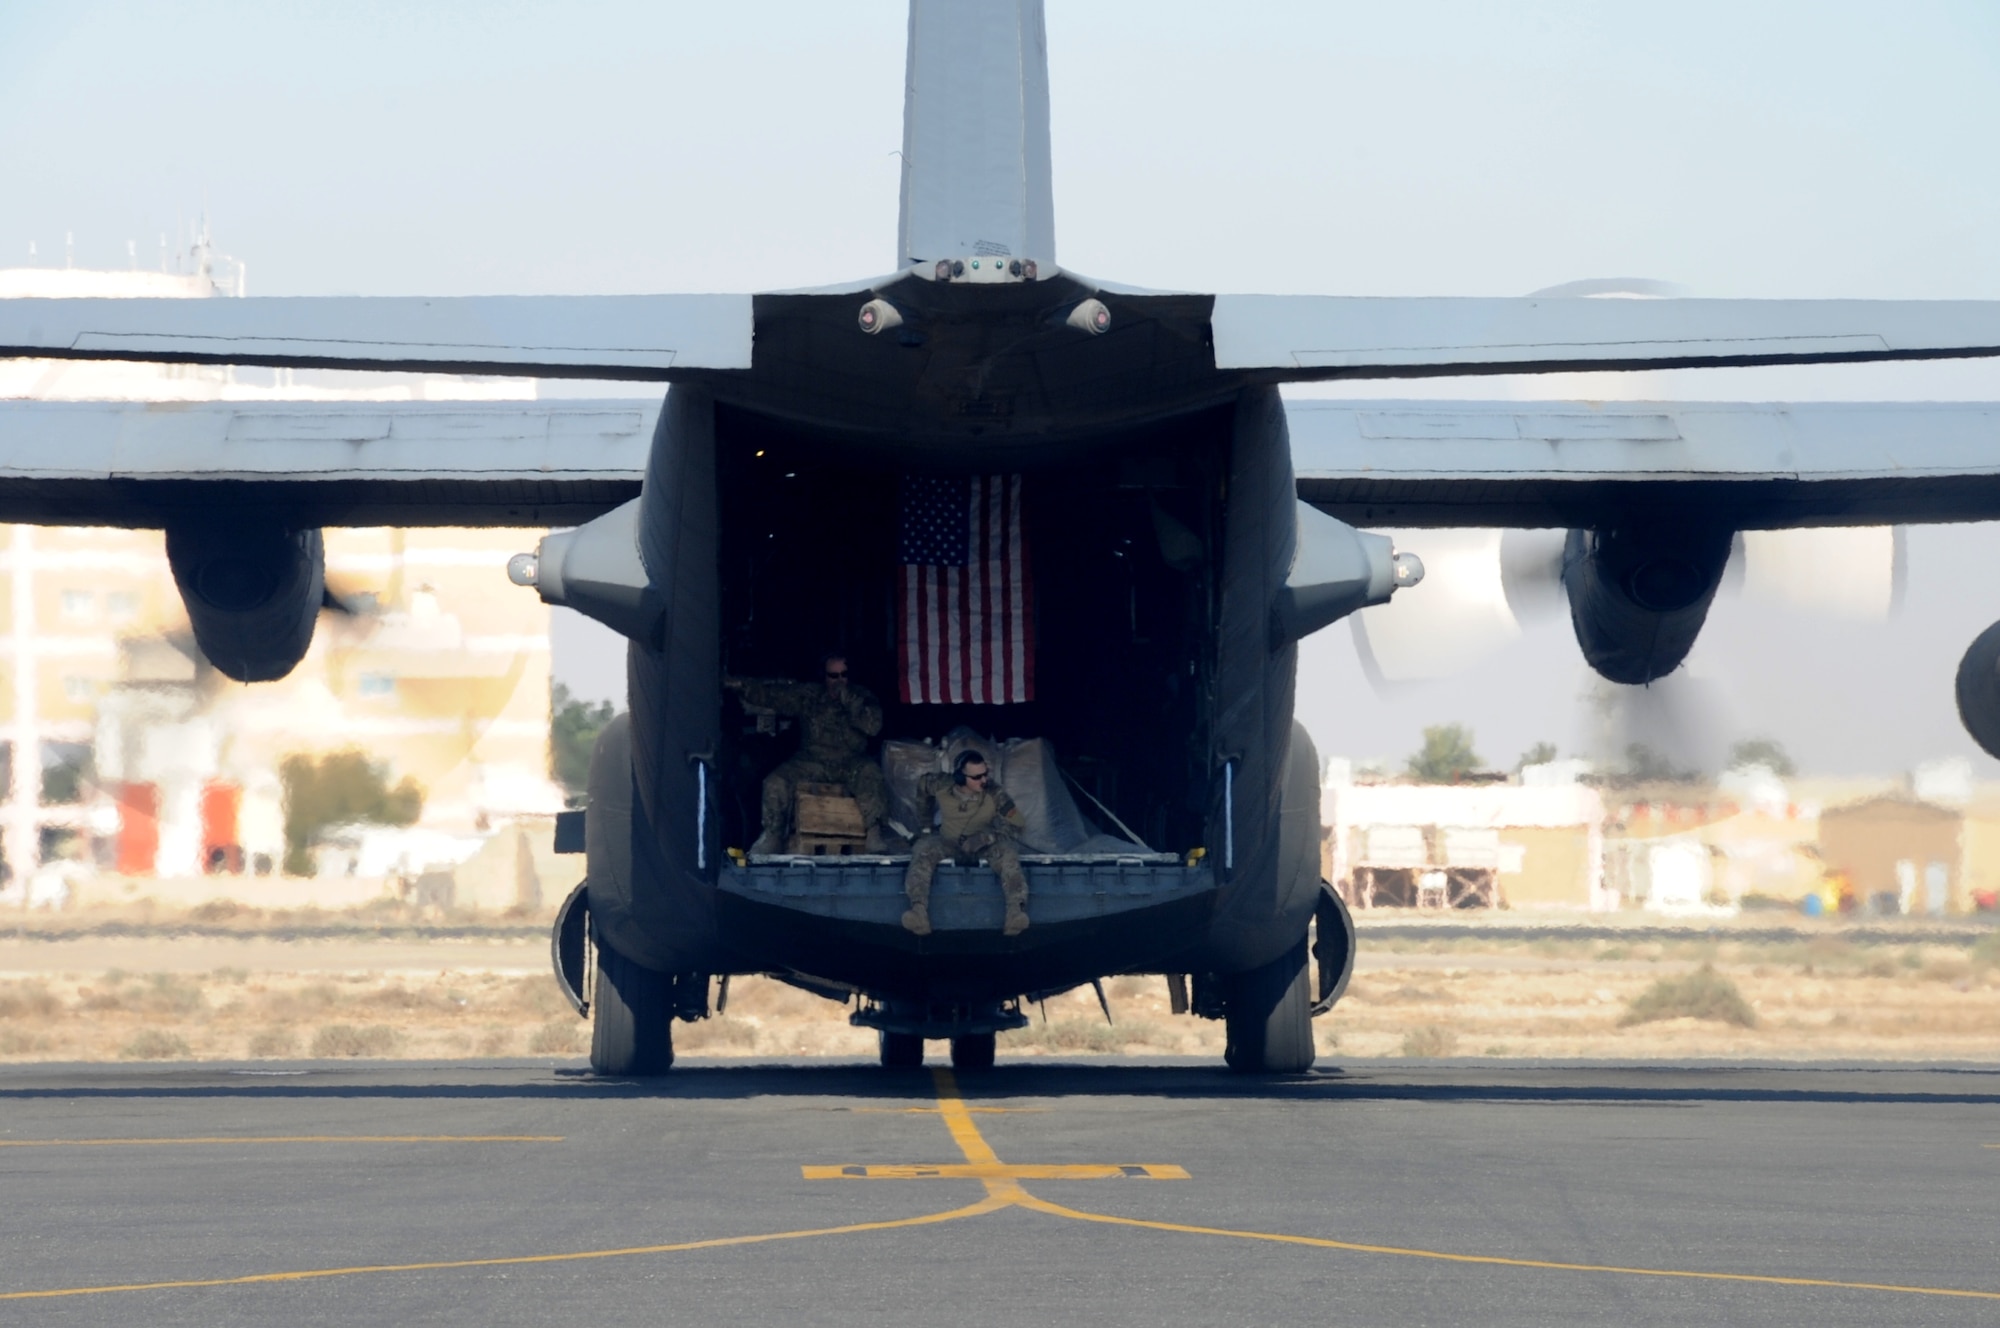 A 737th Expeditionary Airlift Squadron C-130H Hercules taxis on the flightline Feb. 8, 2017 at an undisclosed location in Southwest Asia. The 737th includes Airmen deployed from the 182nd Airlift Wing, Illinois Air National Guard, and supports Operation Inherent Resolve by delivering personnel and cargo downrange. (U.S. Air Force photo/Tech. Sgt. Kenneth McCann)